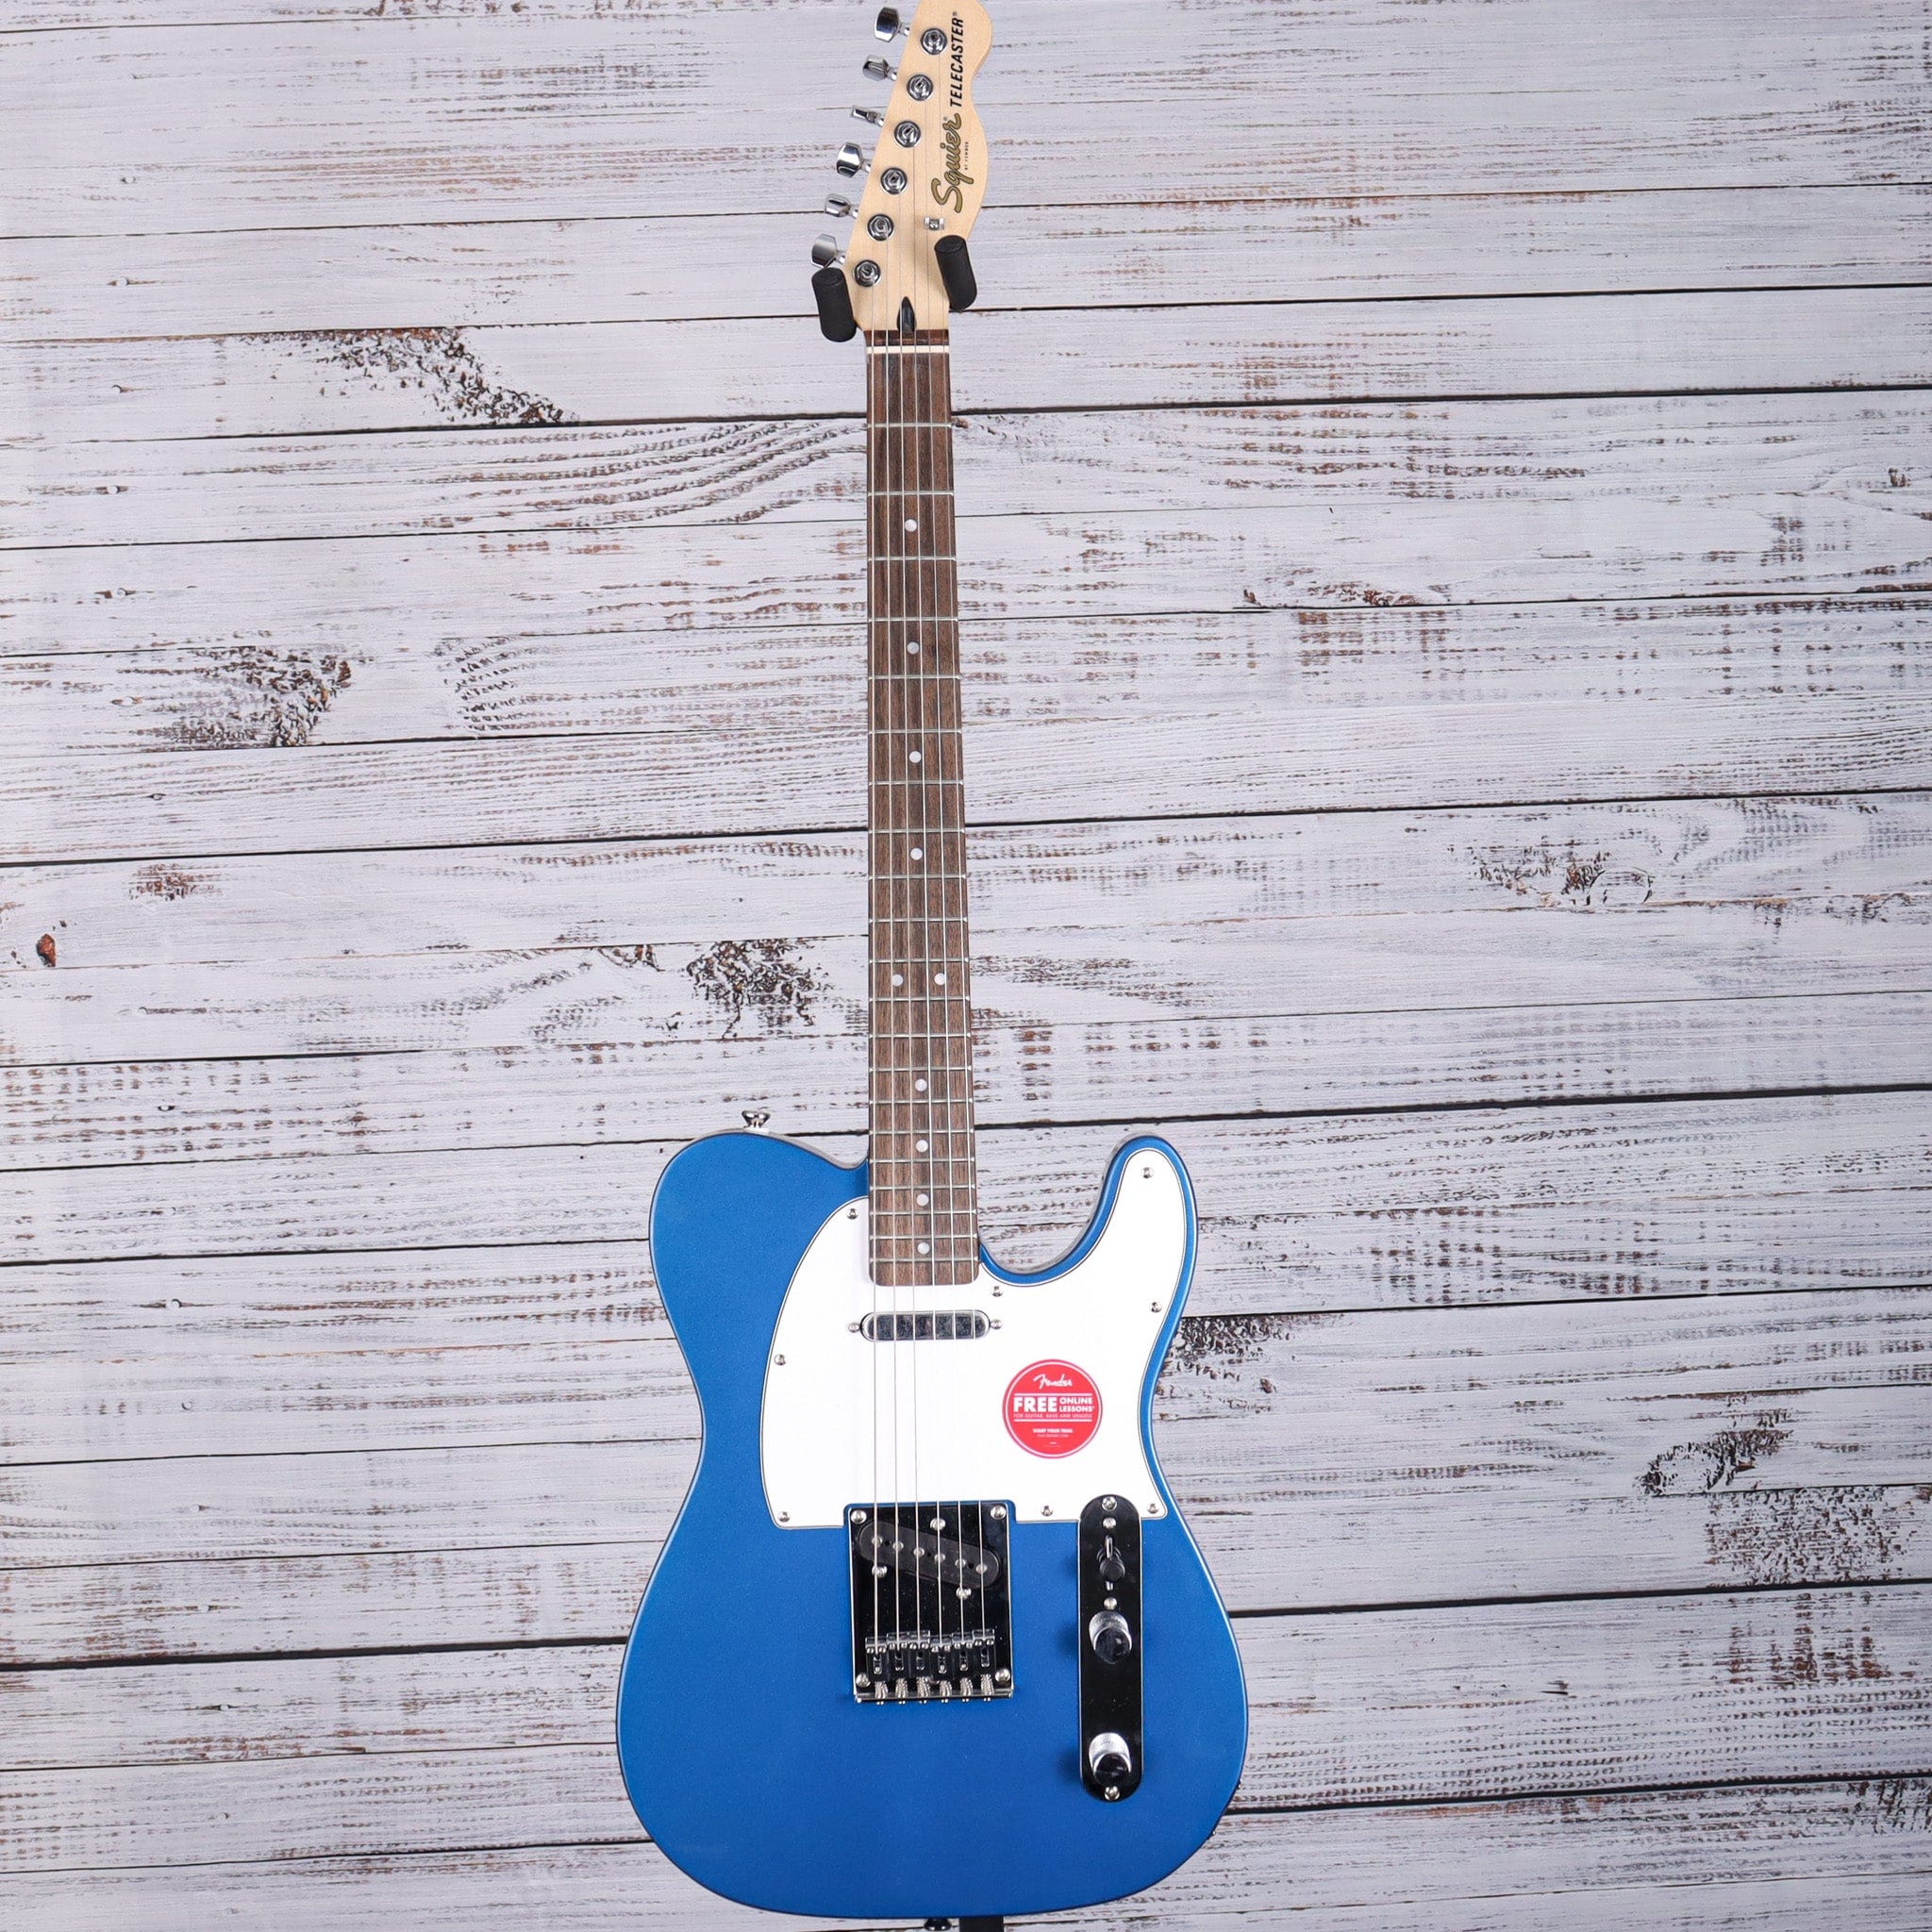 Squier Affinity Series Telecaster, Lake Placid Blue | 0378200502